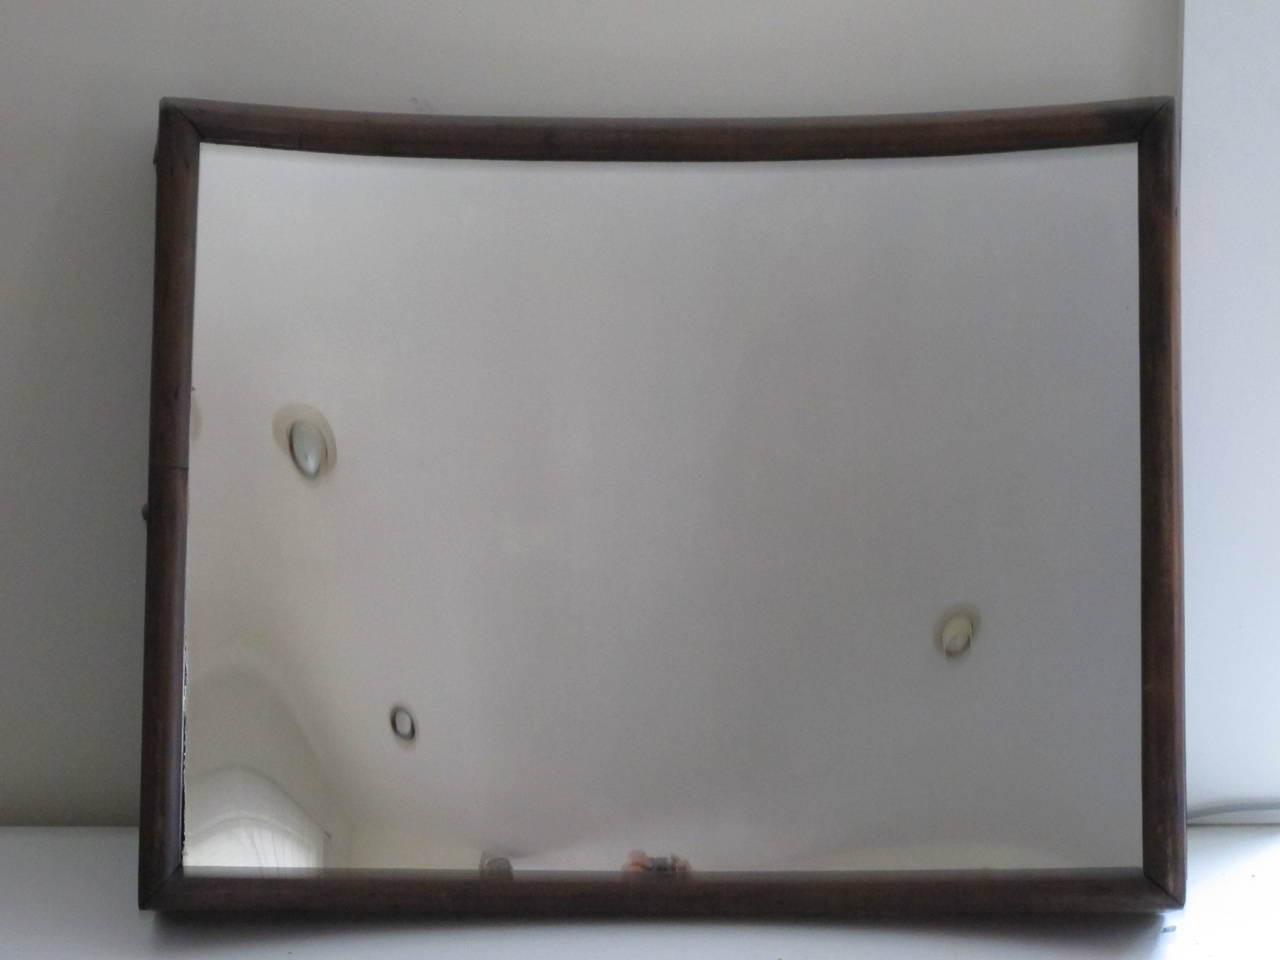 Small size fun house mirror with concave glass mirror set into wood frame. The mirror can be hung either vertically or horizontal for different image bending of light. Most trick mirrors I have seen are huge and unwieldy.